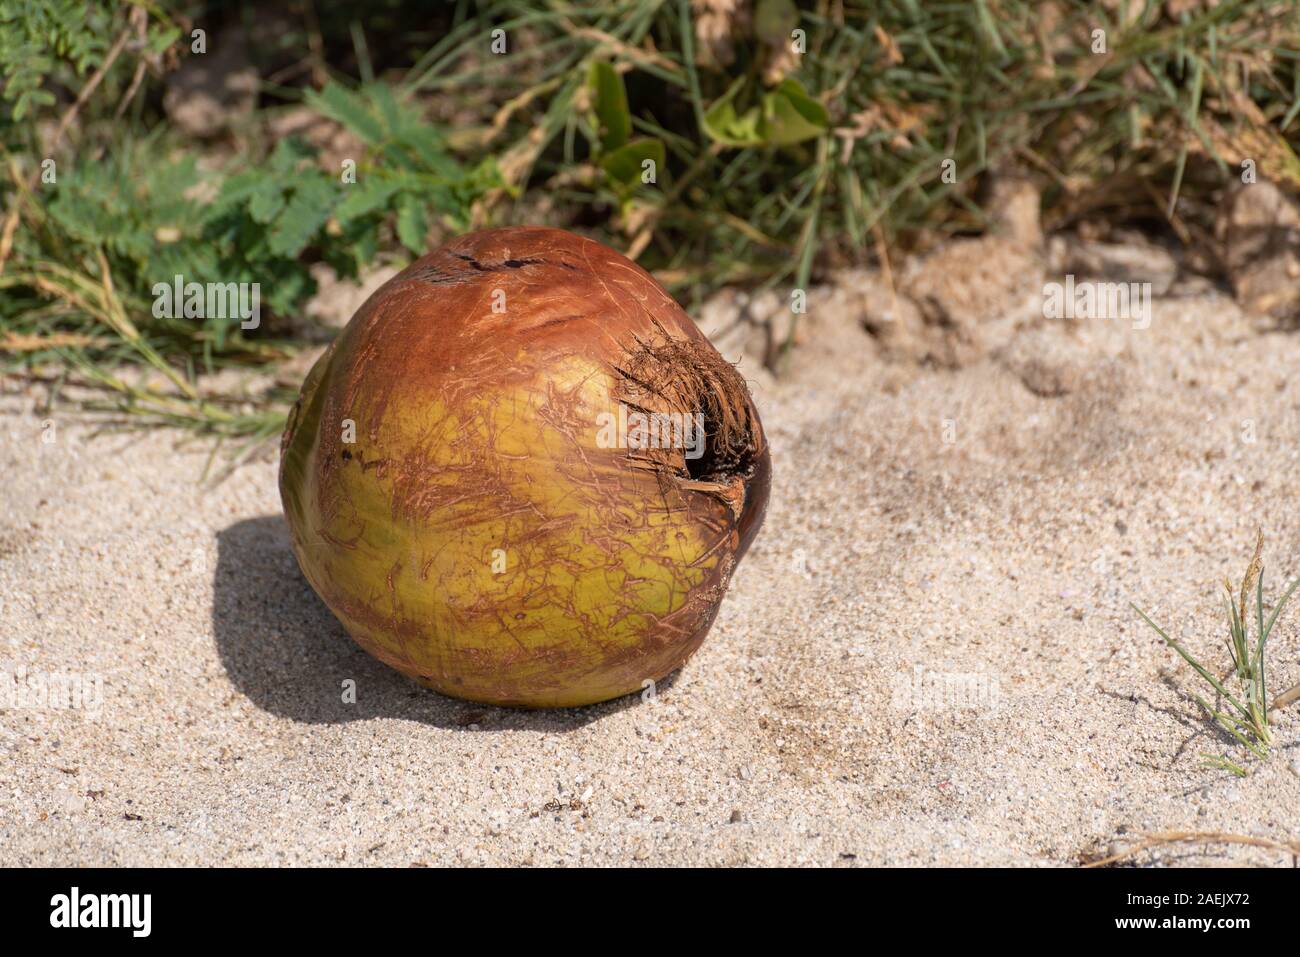 A used and discarded single coconut shell lying on the beach. Stock Photo